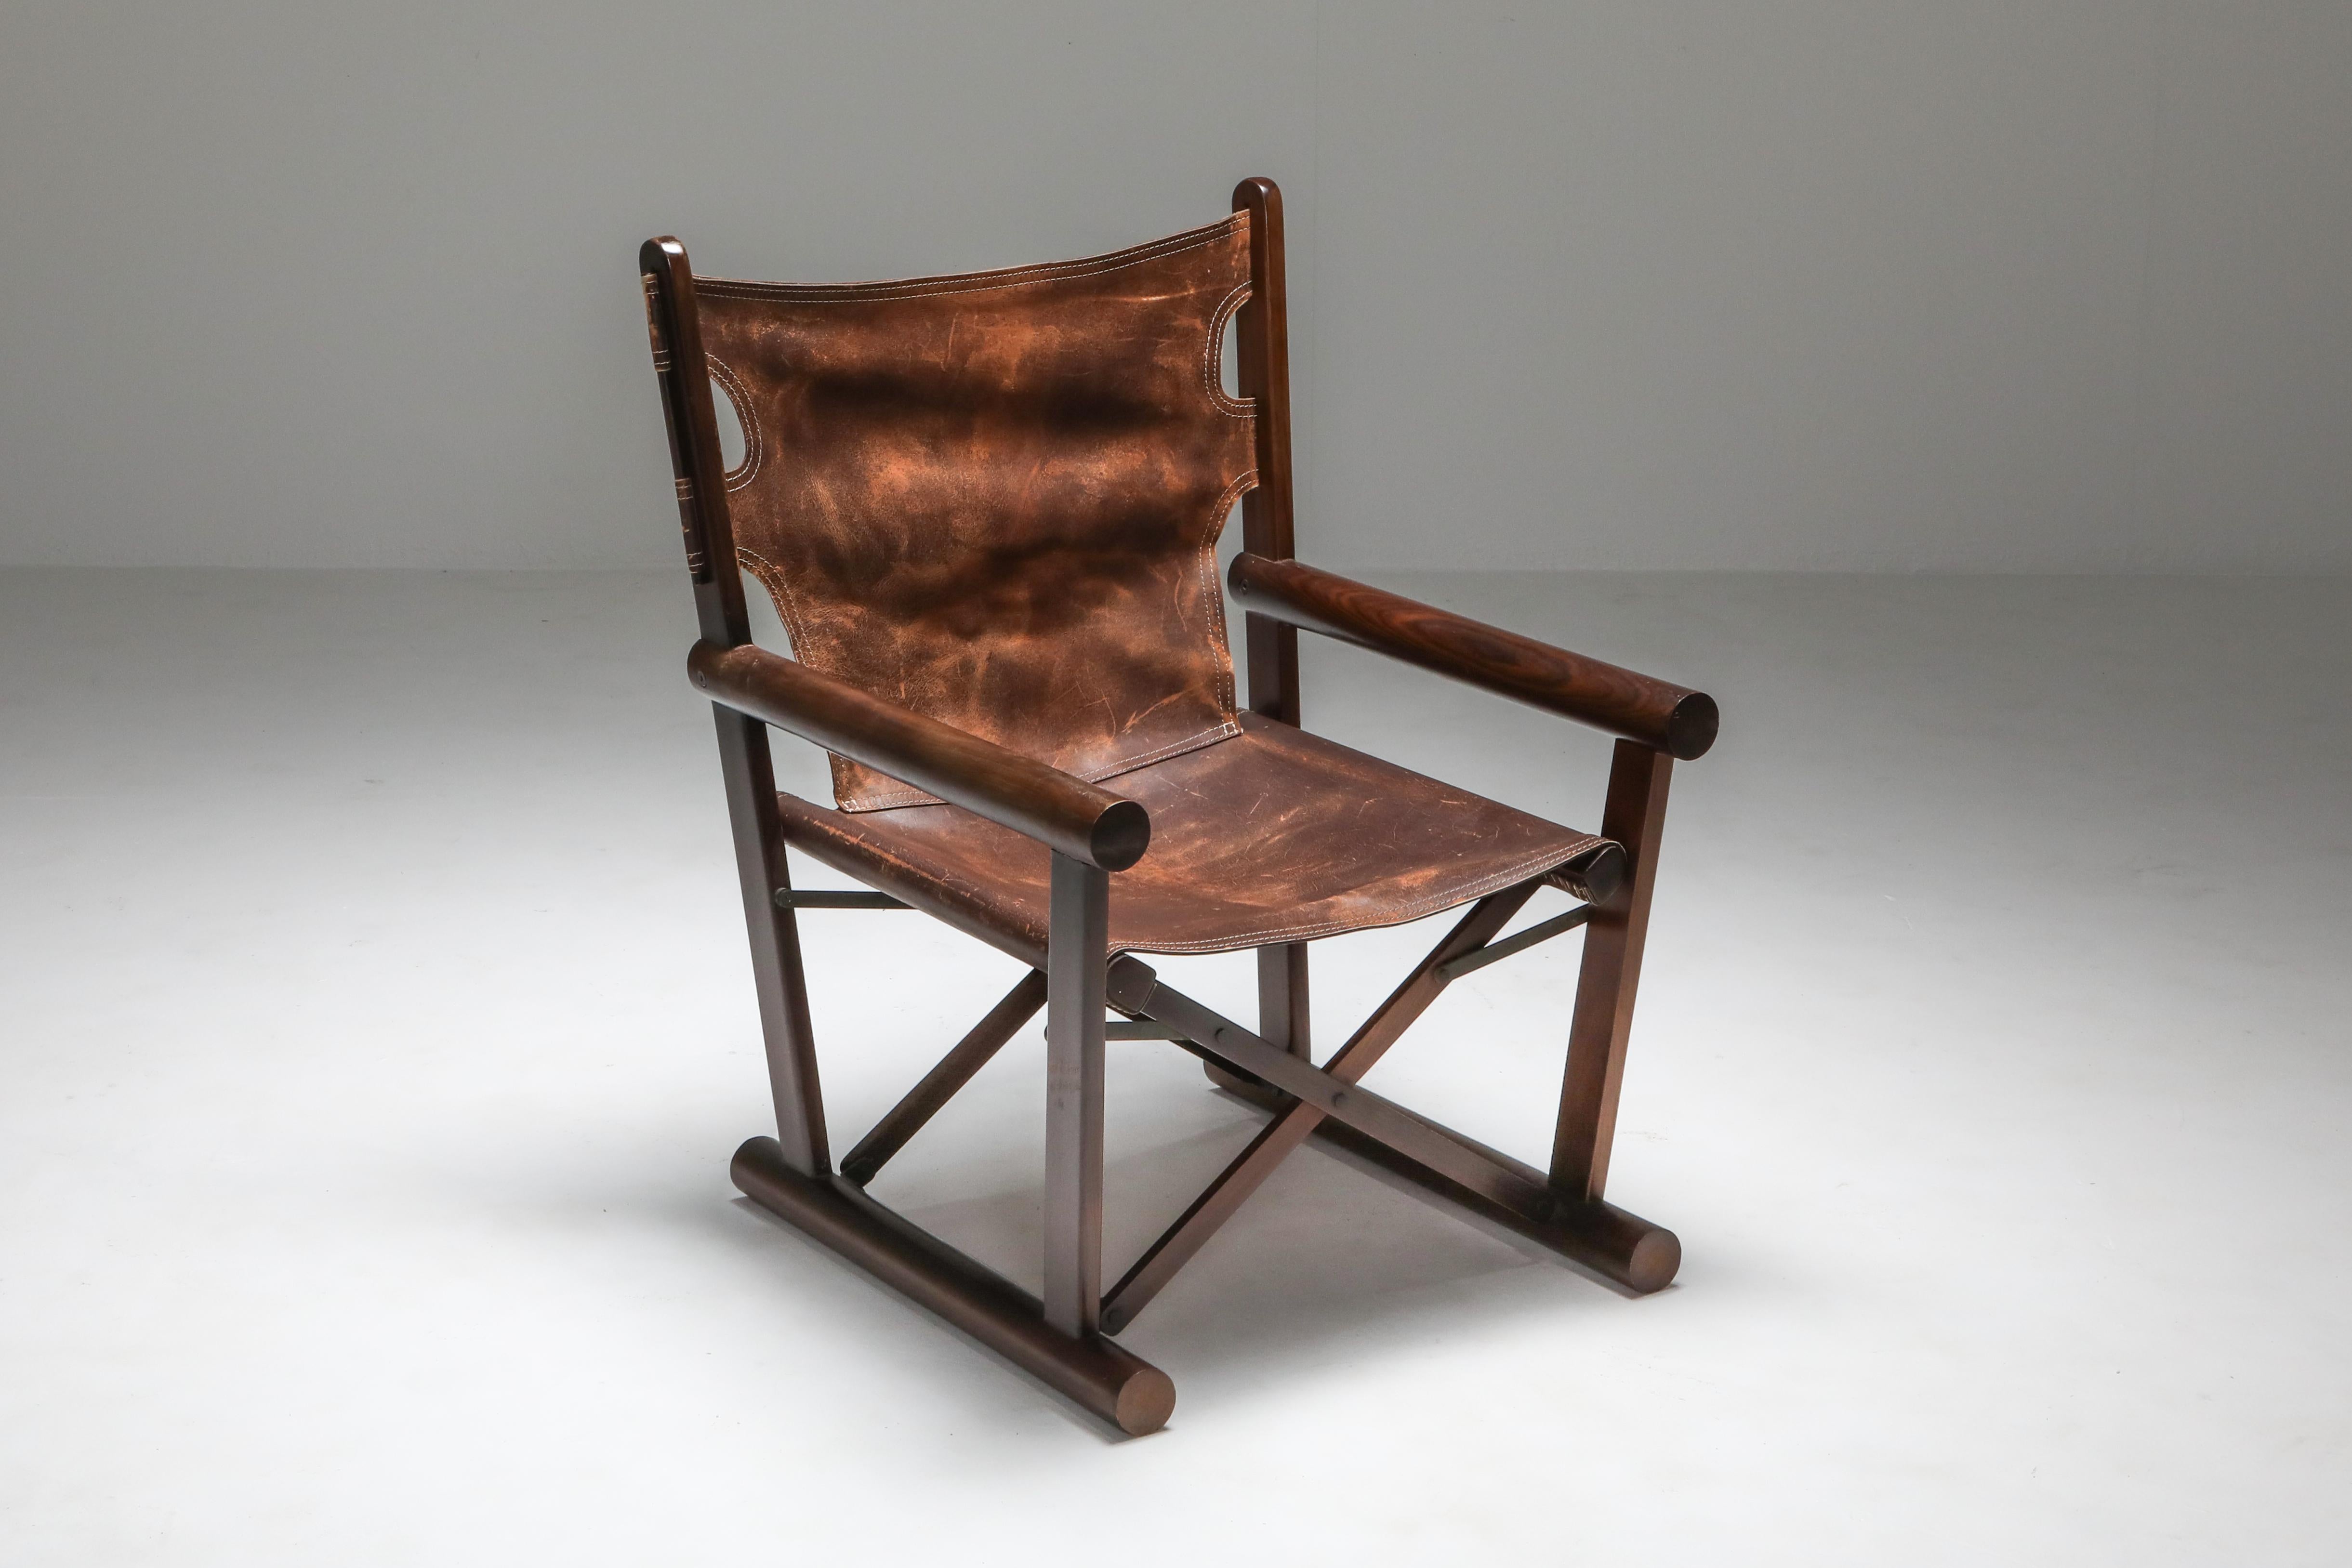 Brazilian modern chair by Carlo Hauner, Oca, 1960s

This folding chair is iconic for Brazilian Mid-Century Modern, from the 1960s. This particular piece is executed with a jacaranda frame and brown leather sling seat. 

   